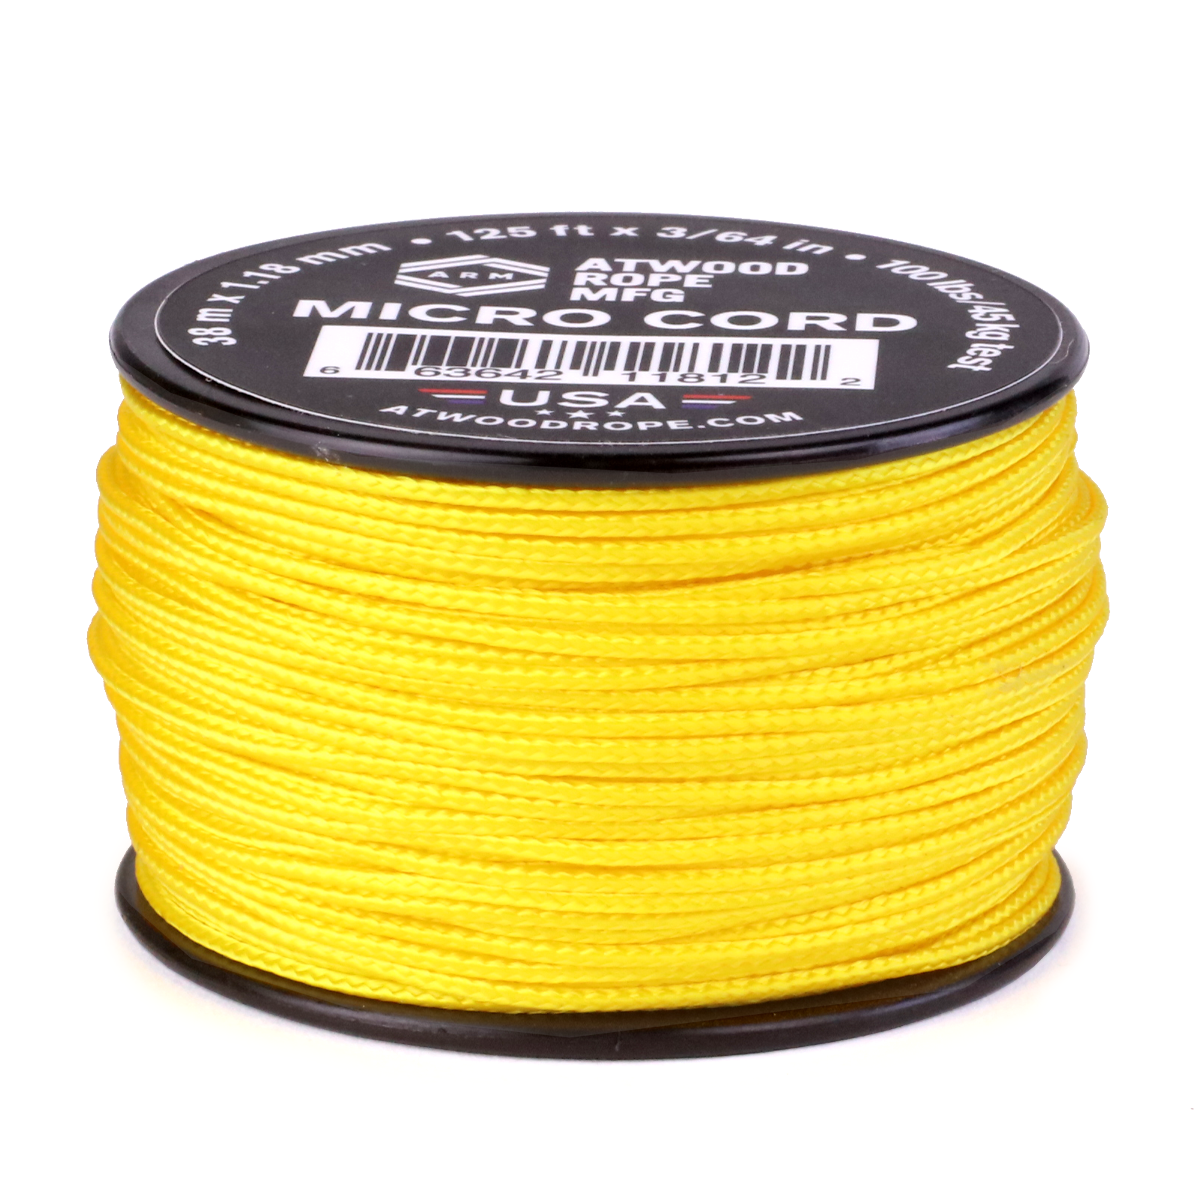 Atwood Micro Cord – Been Campin